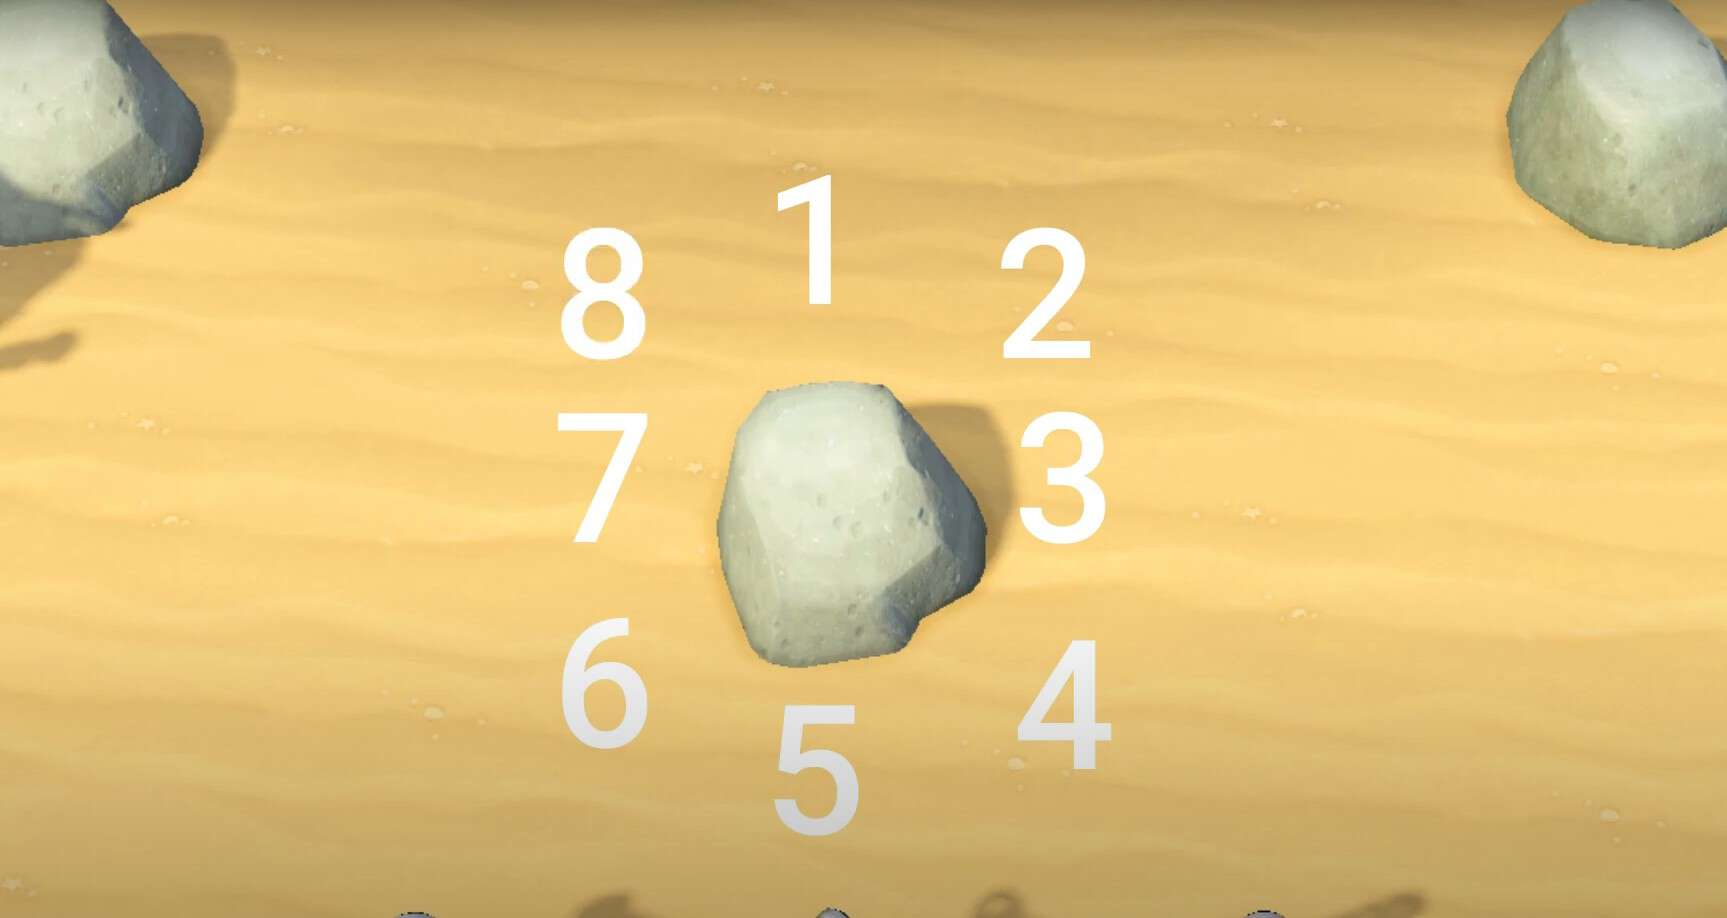 How To Move Rocks In Animal Crossing New Horizons